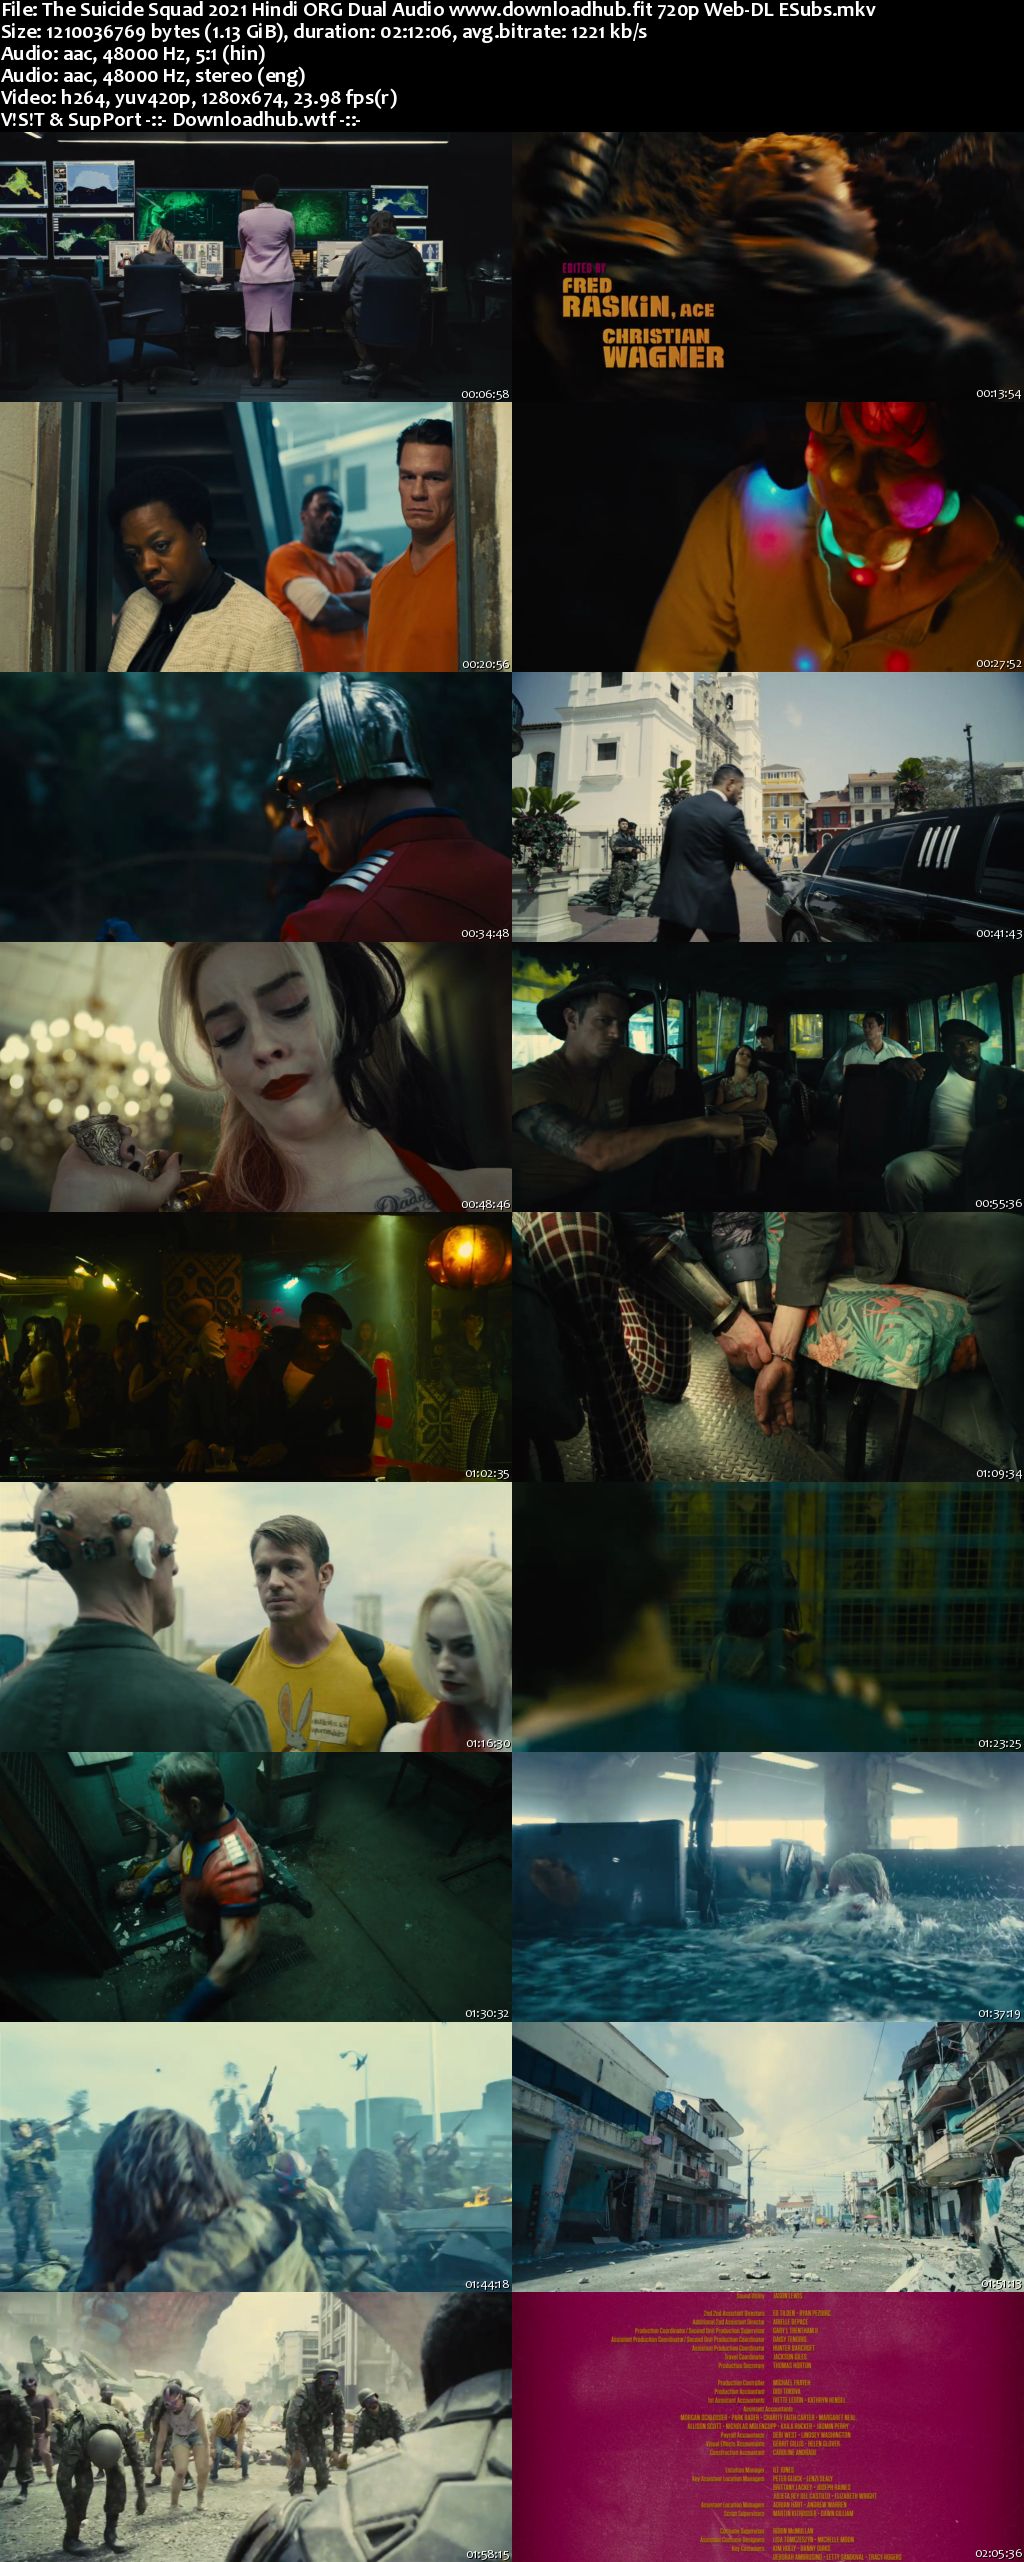 The Suicide Squad 2021 Hindi ORG Dual Audio 720p Web-DL ESubs